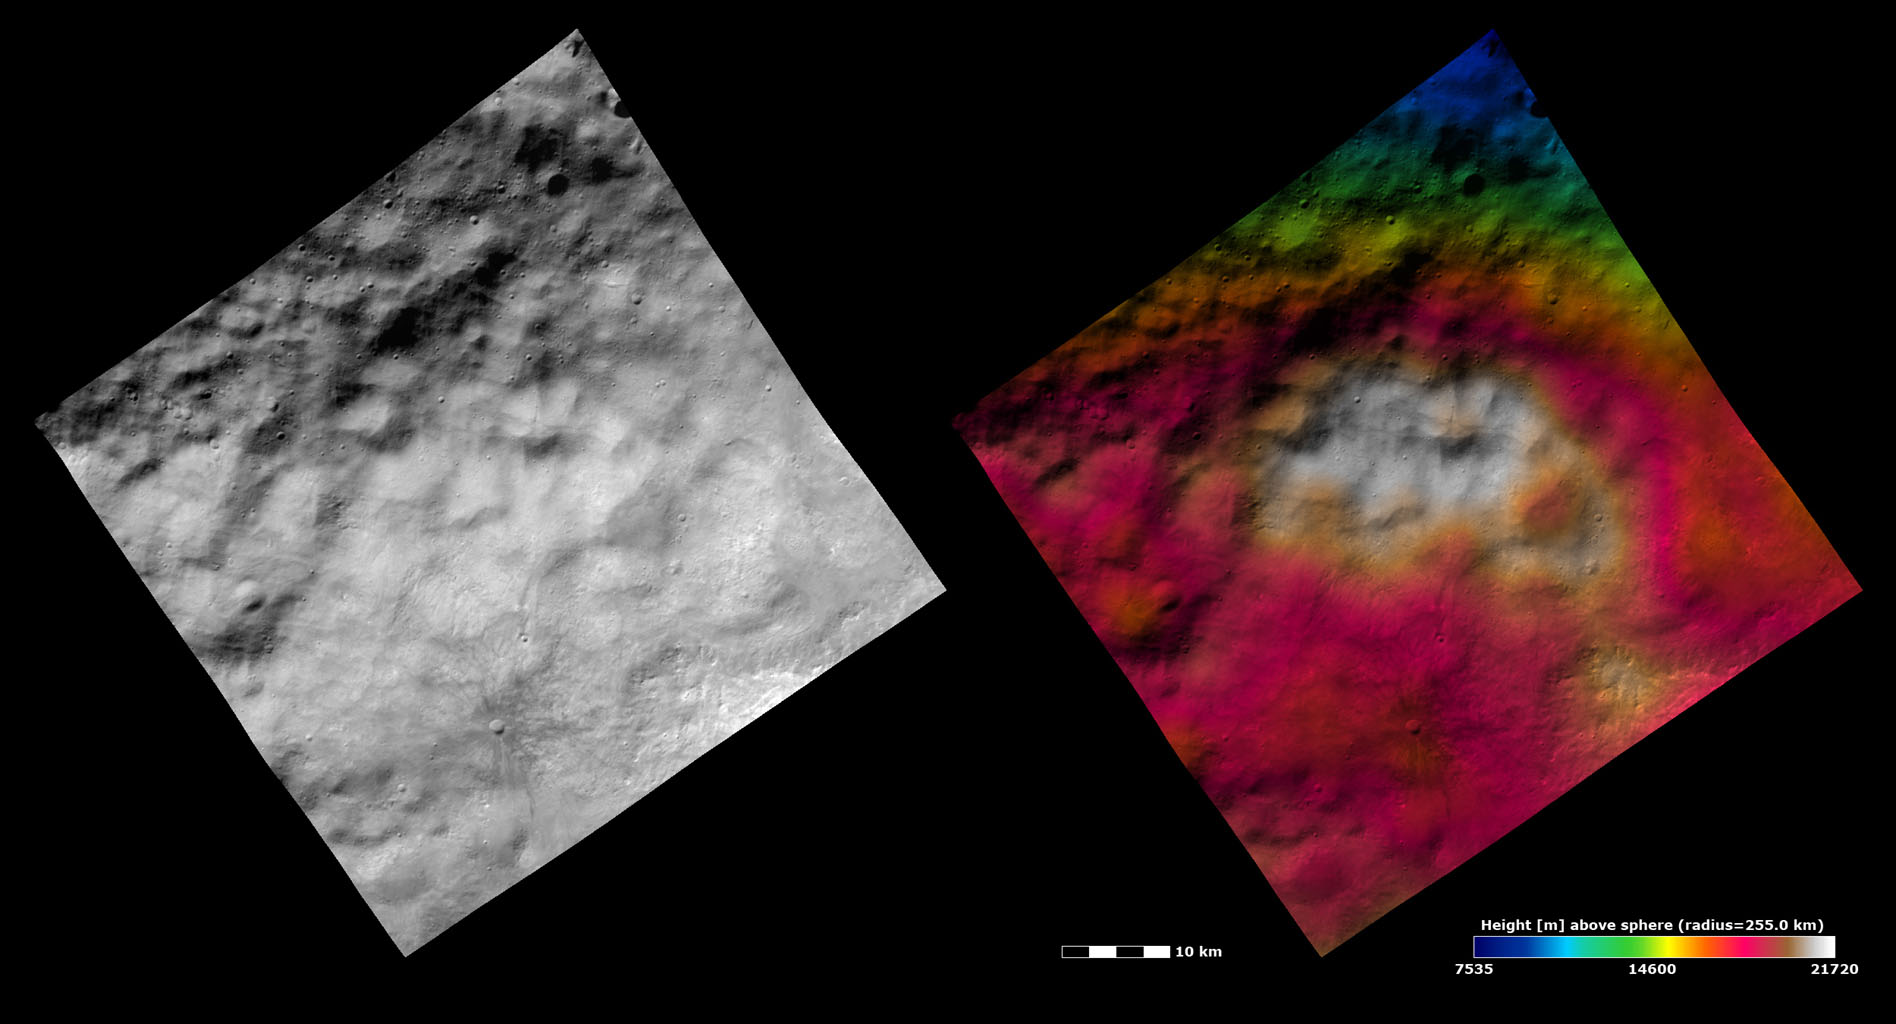 Topography and Albedo Image of Hummocky-mantled Terrain on Vesta